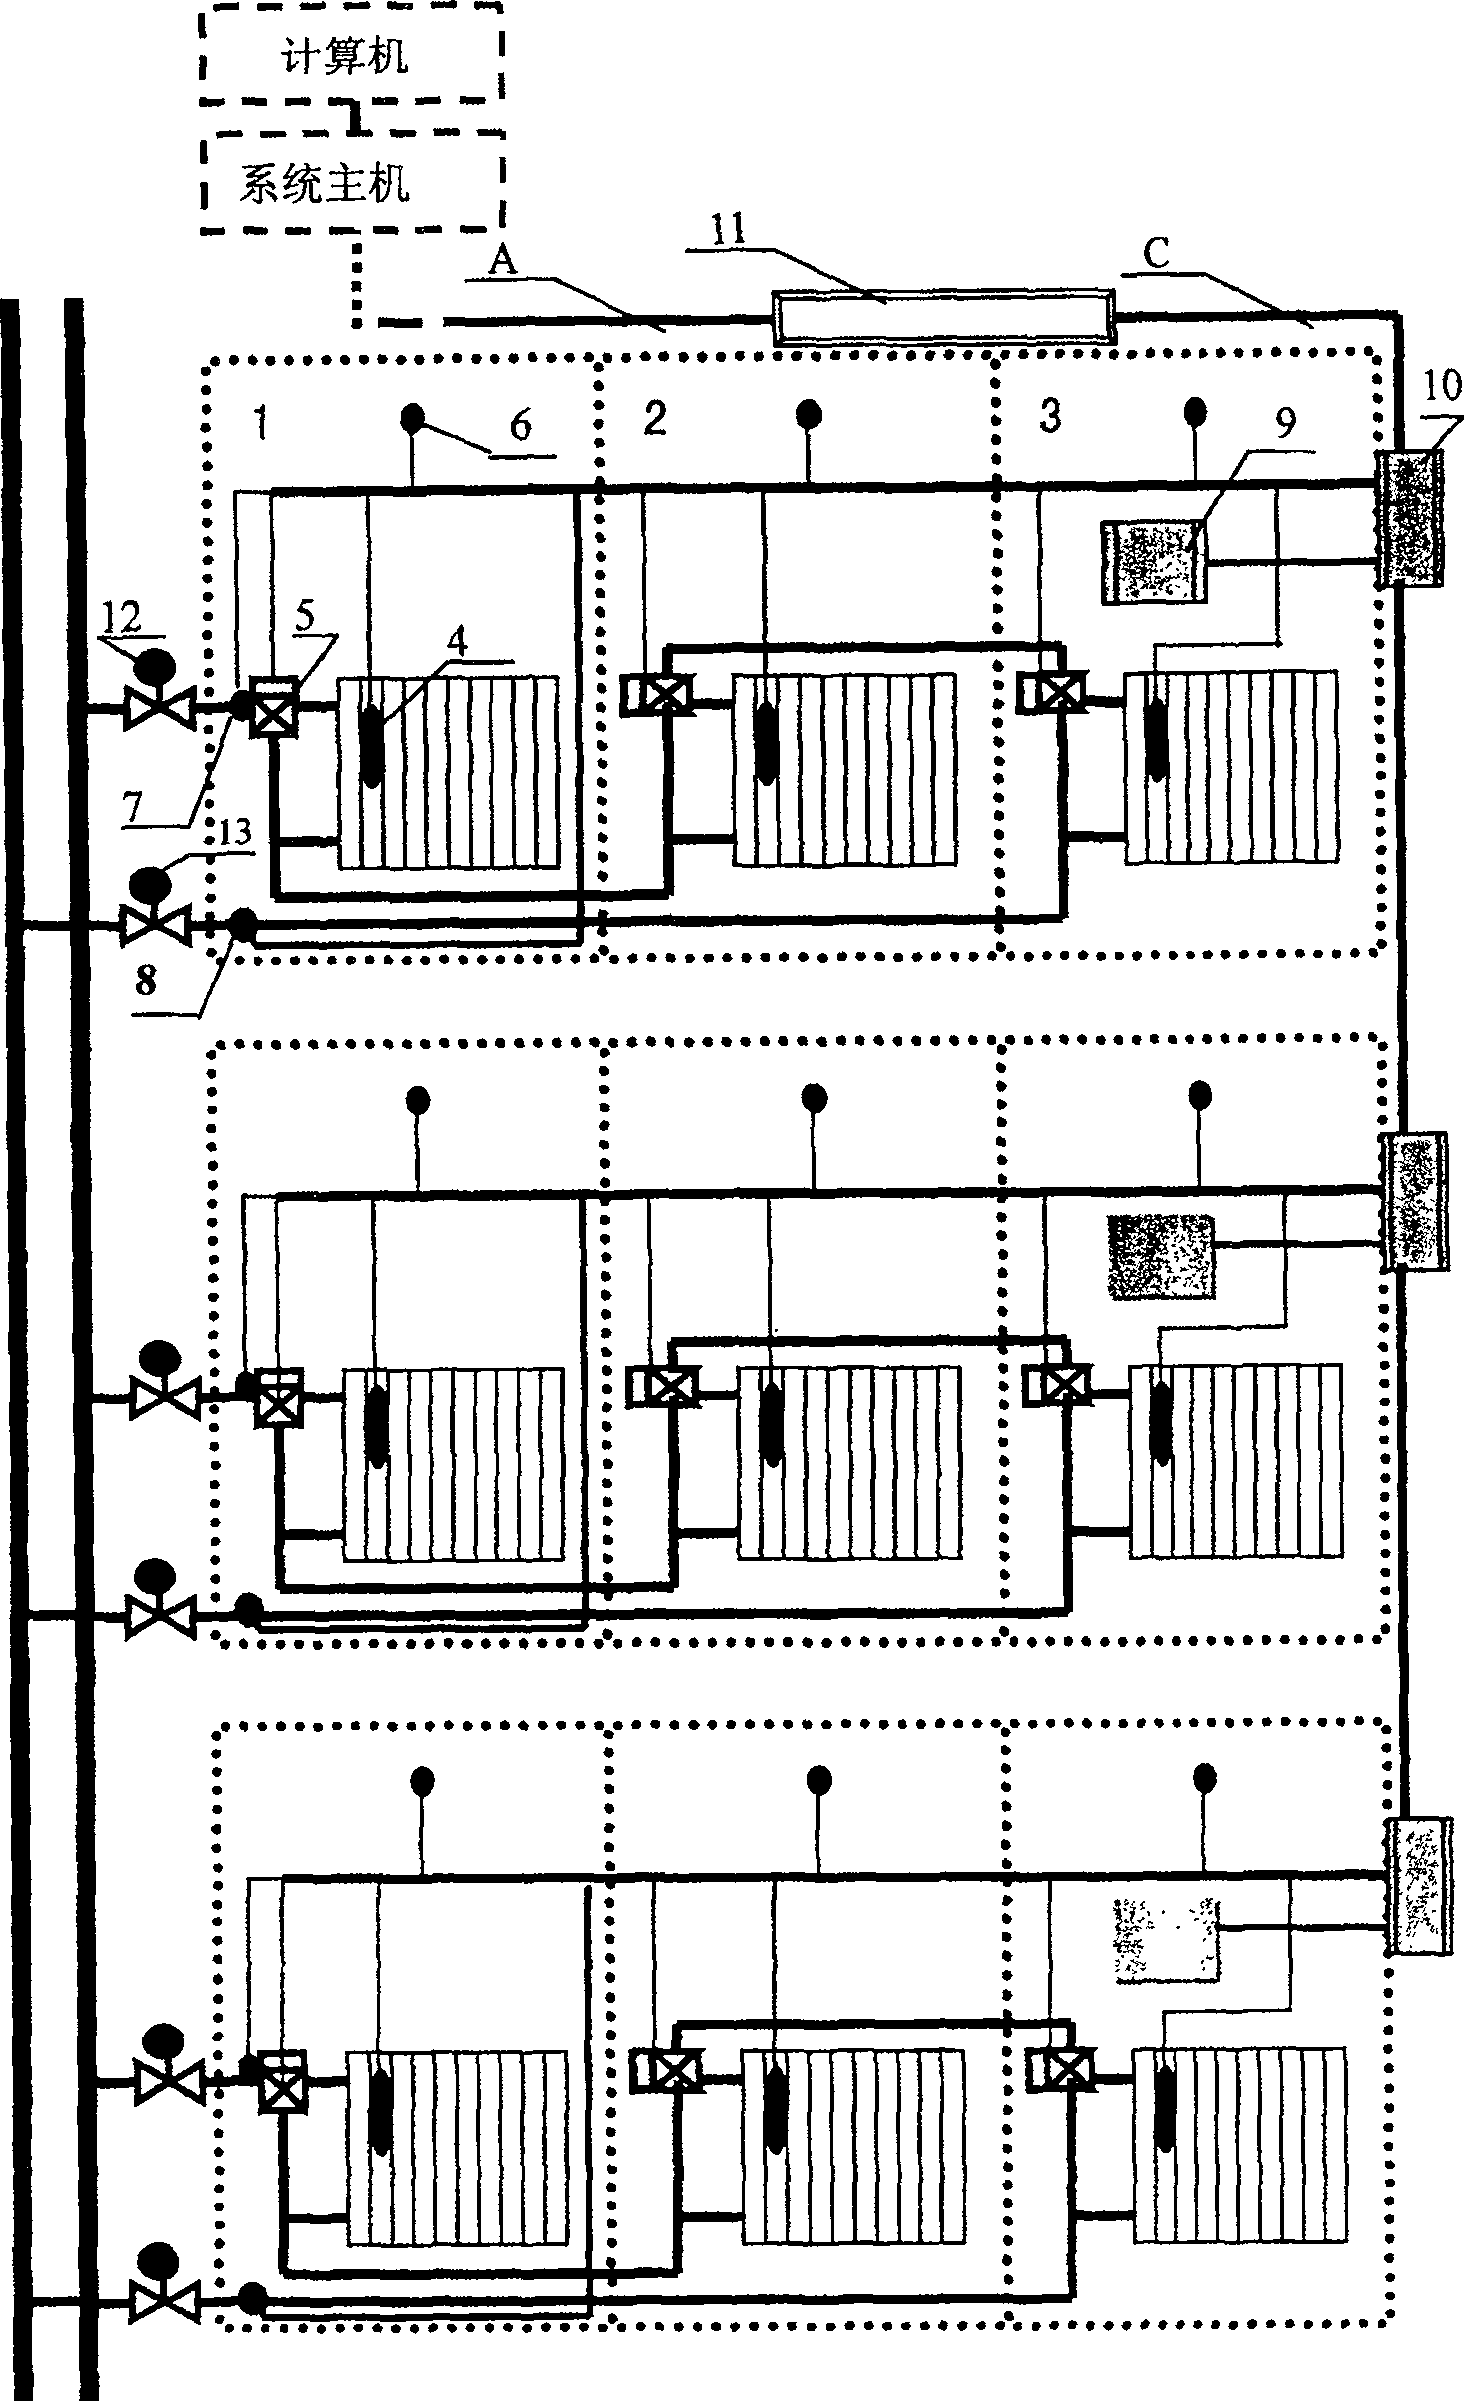 Computer management and control system for separate heating